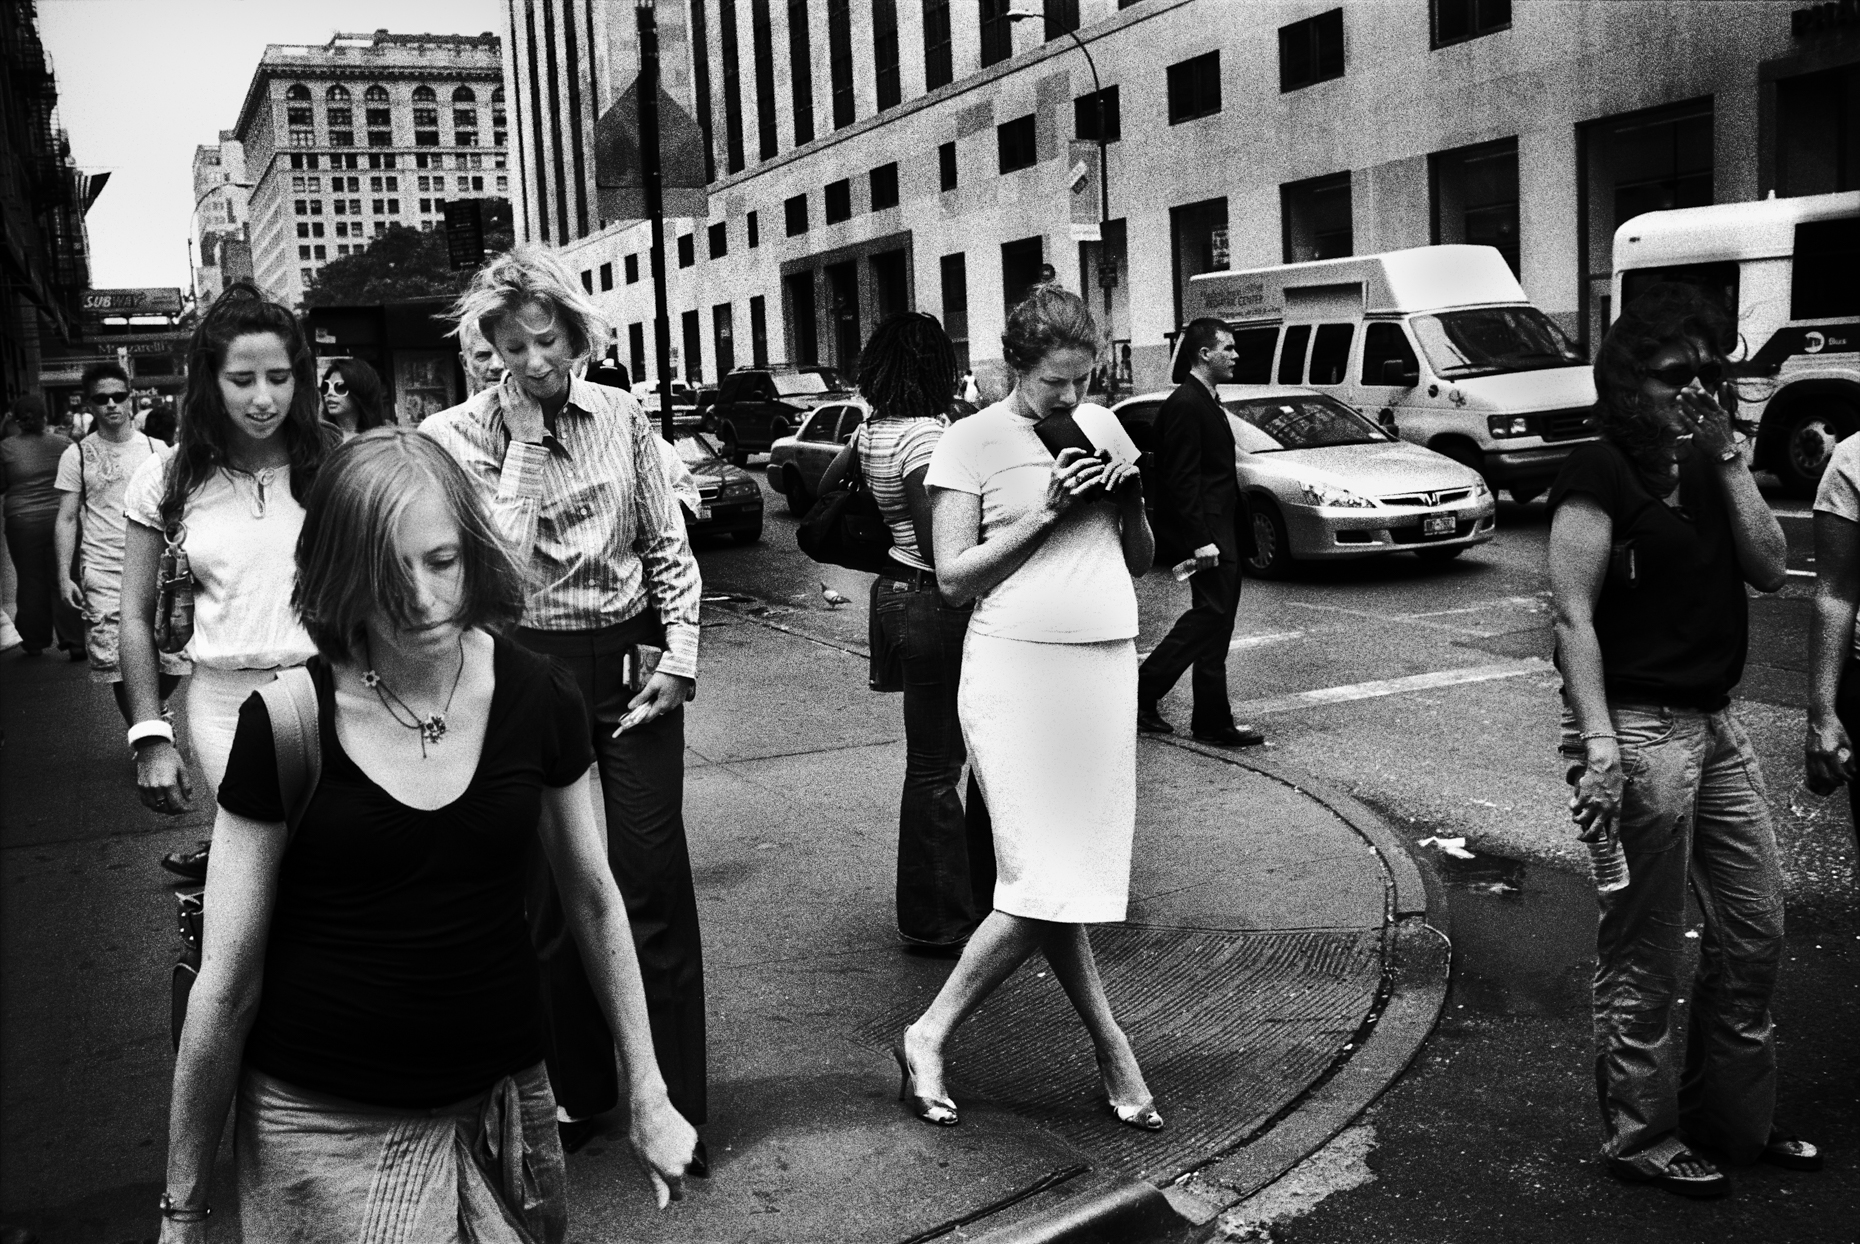 23rd St., & Park Ave., New York City, 2006 (from Dear New Yorker)